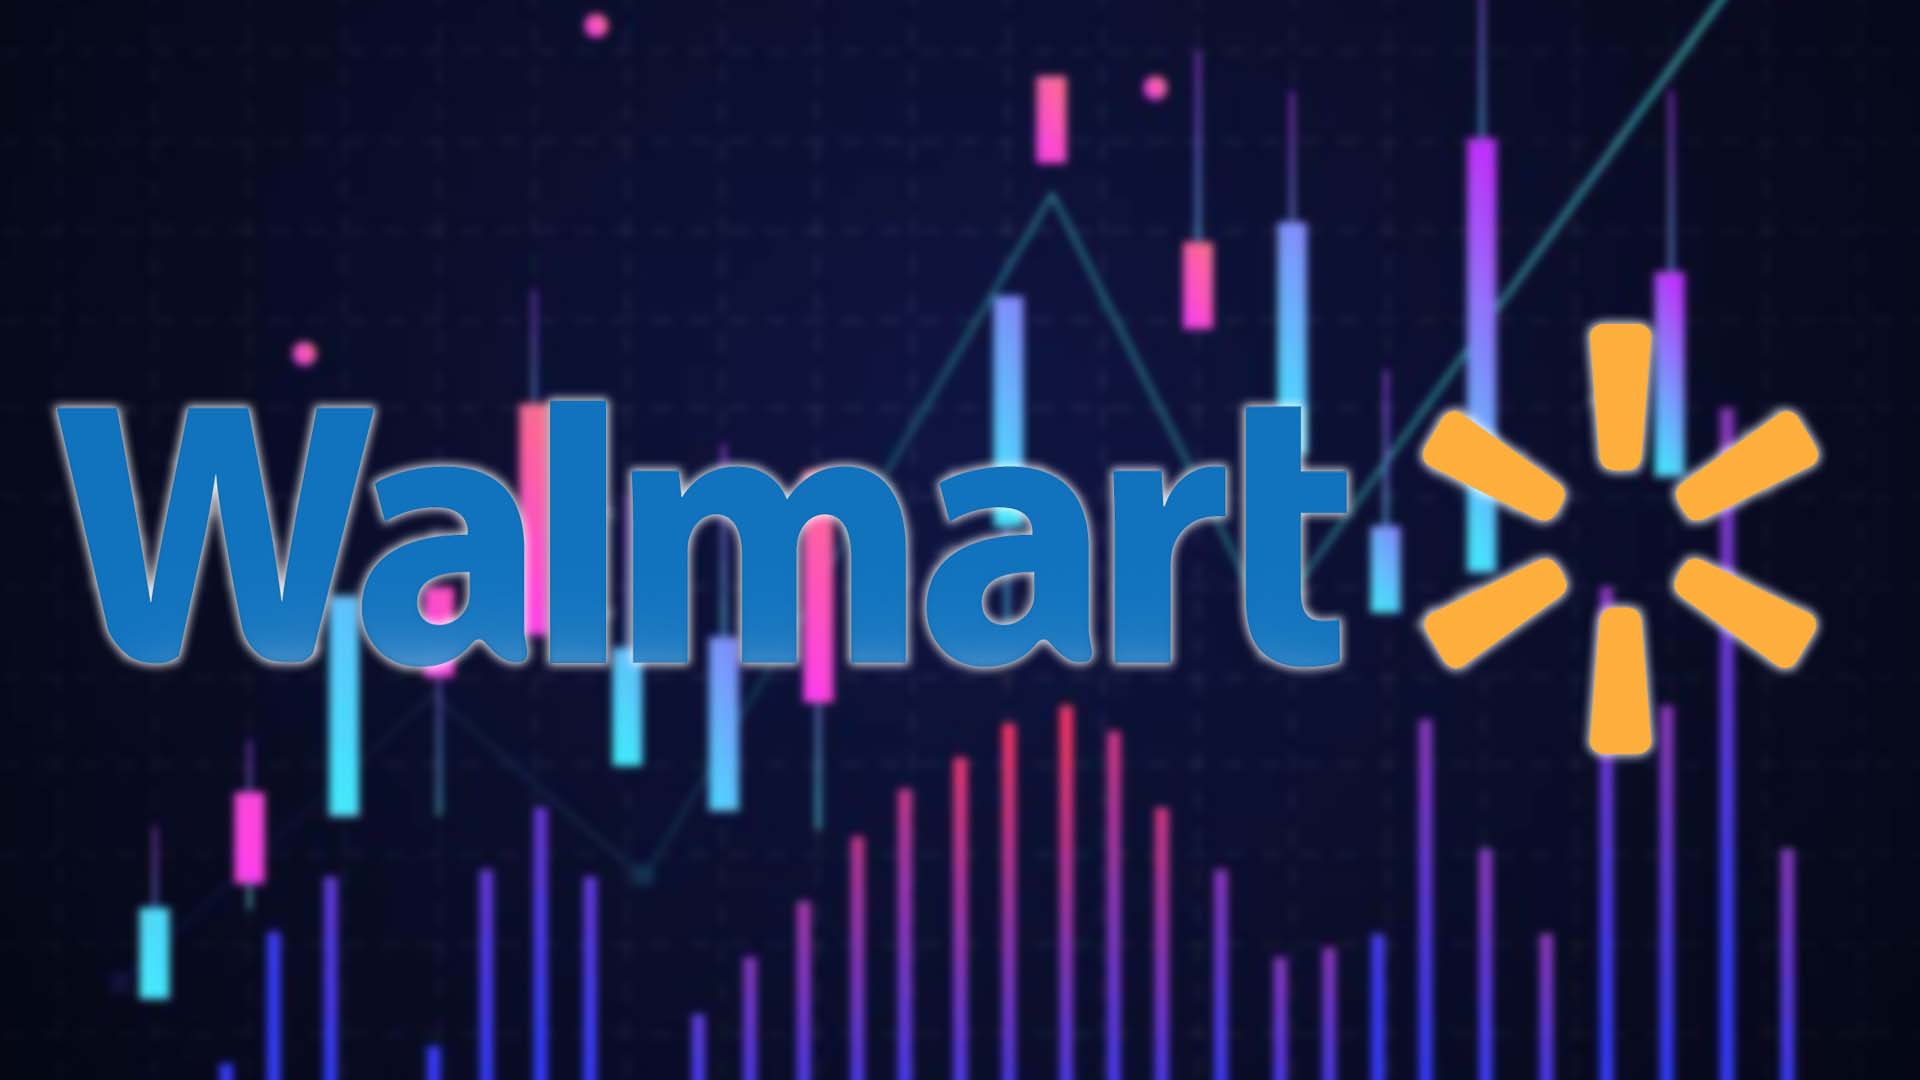 Walmart Stock Price Await for Dividends, Here’s an Overview